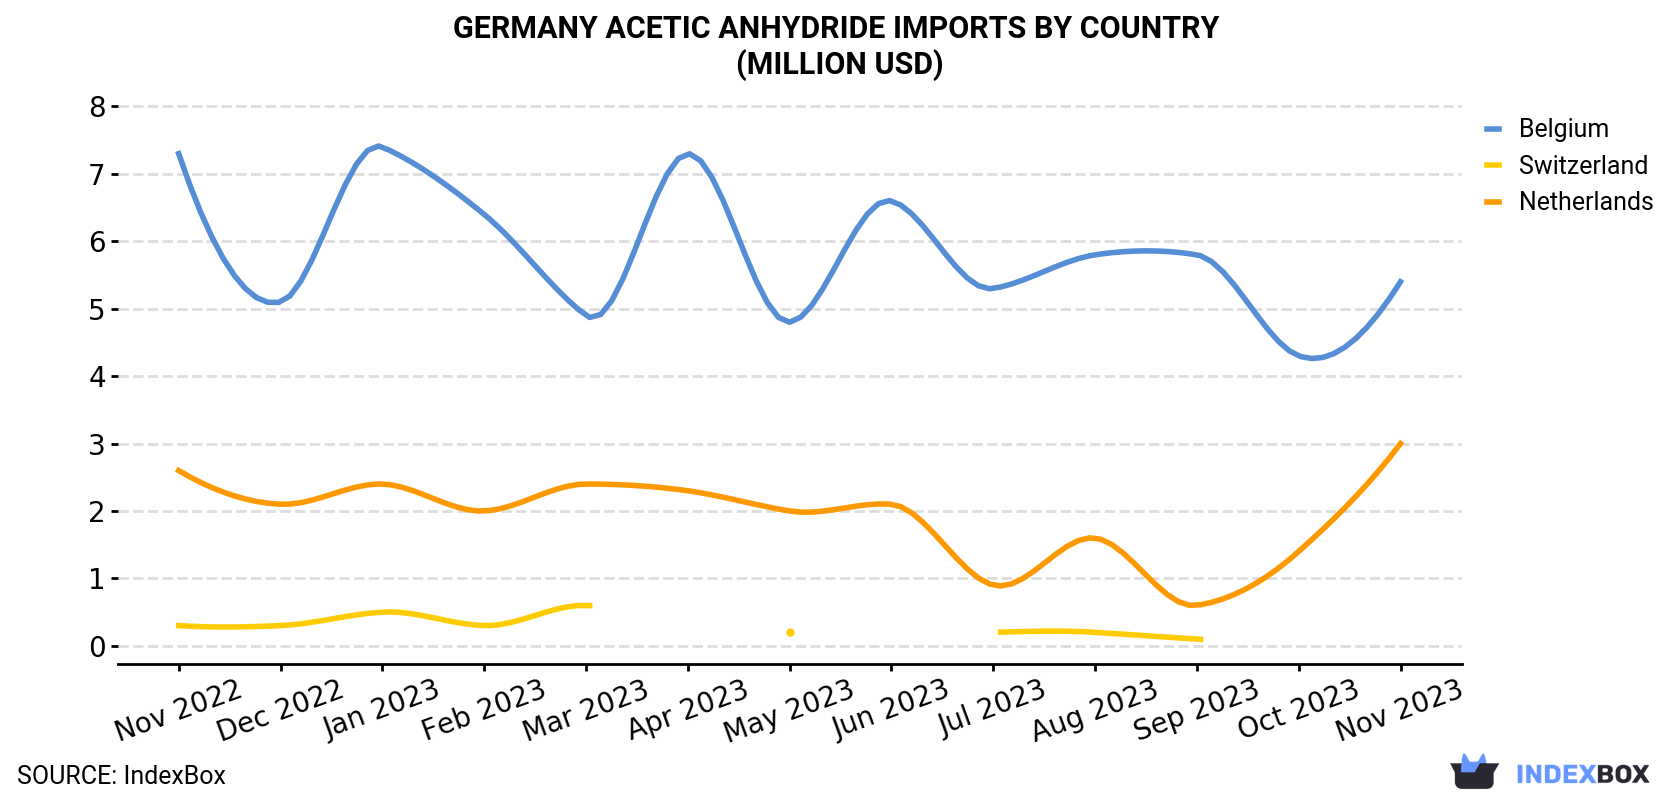 Germany Acetic Anhydride Imports By Country (Million USD)